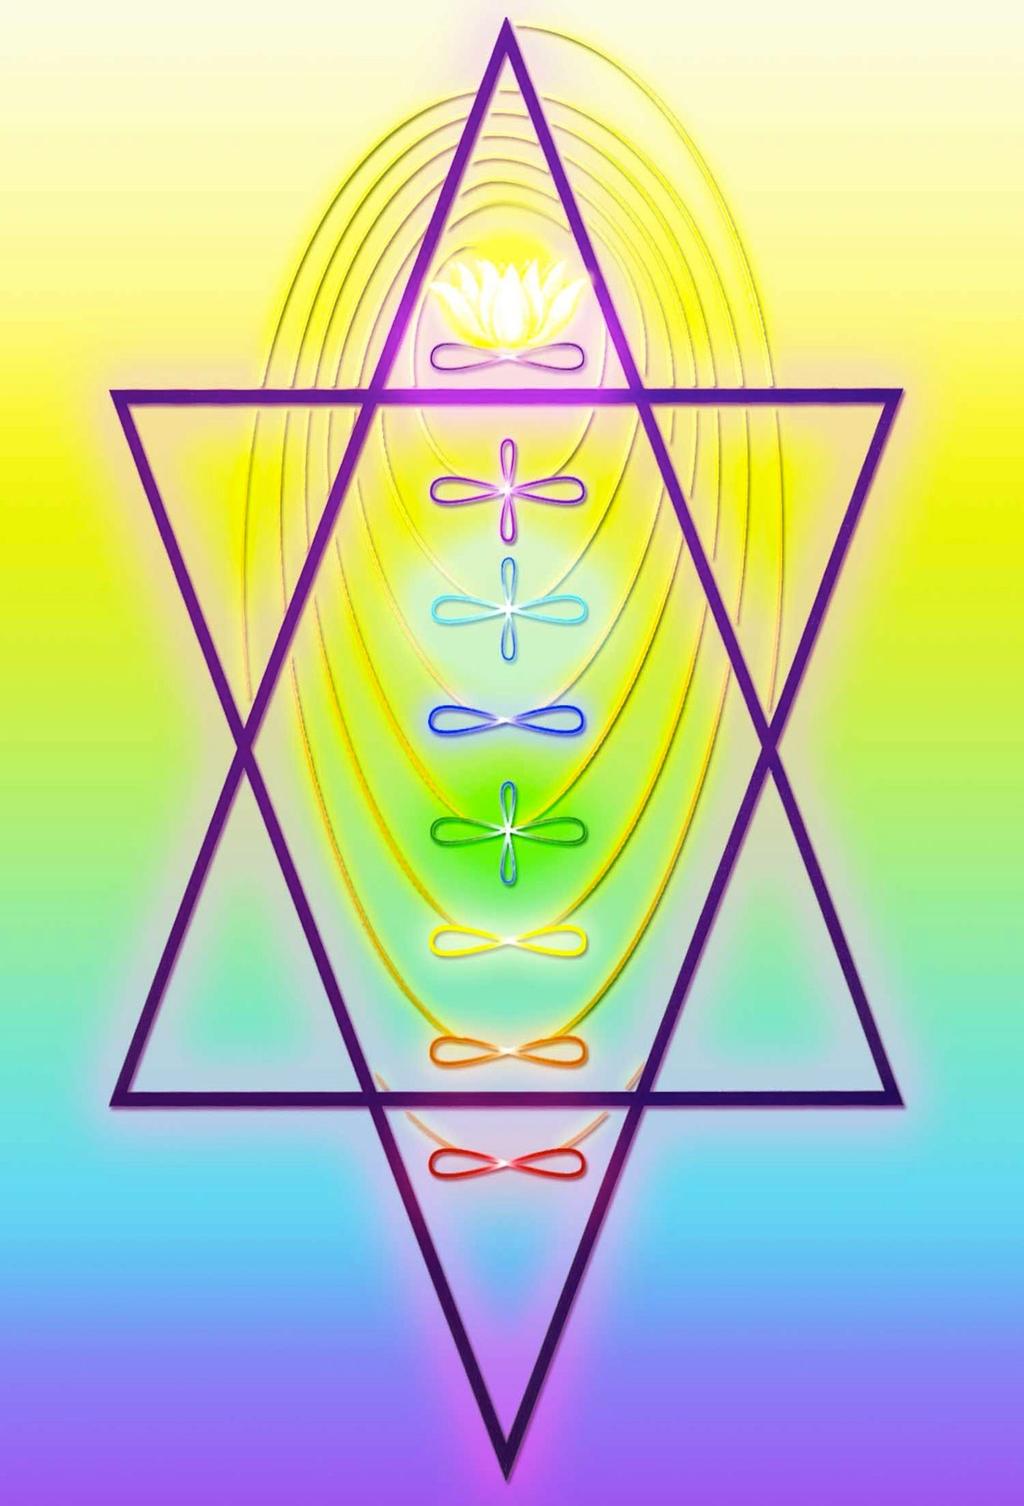 The Self-Ascended Chakra Portrait, (above), depicts our chakras in the Self-Ascended state.